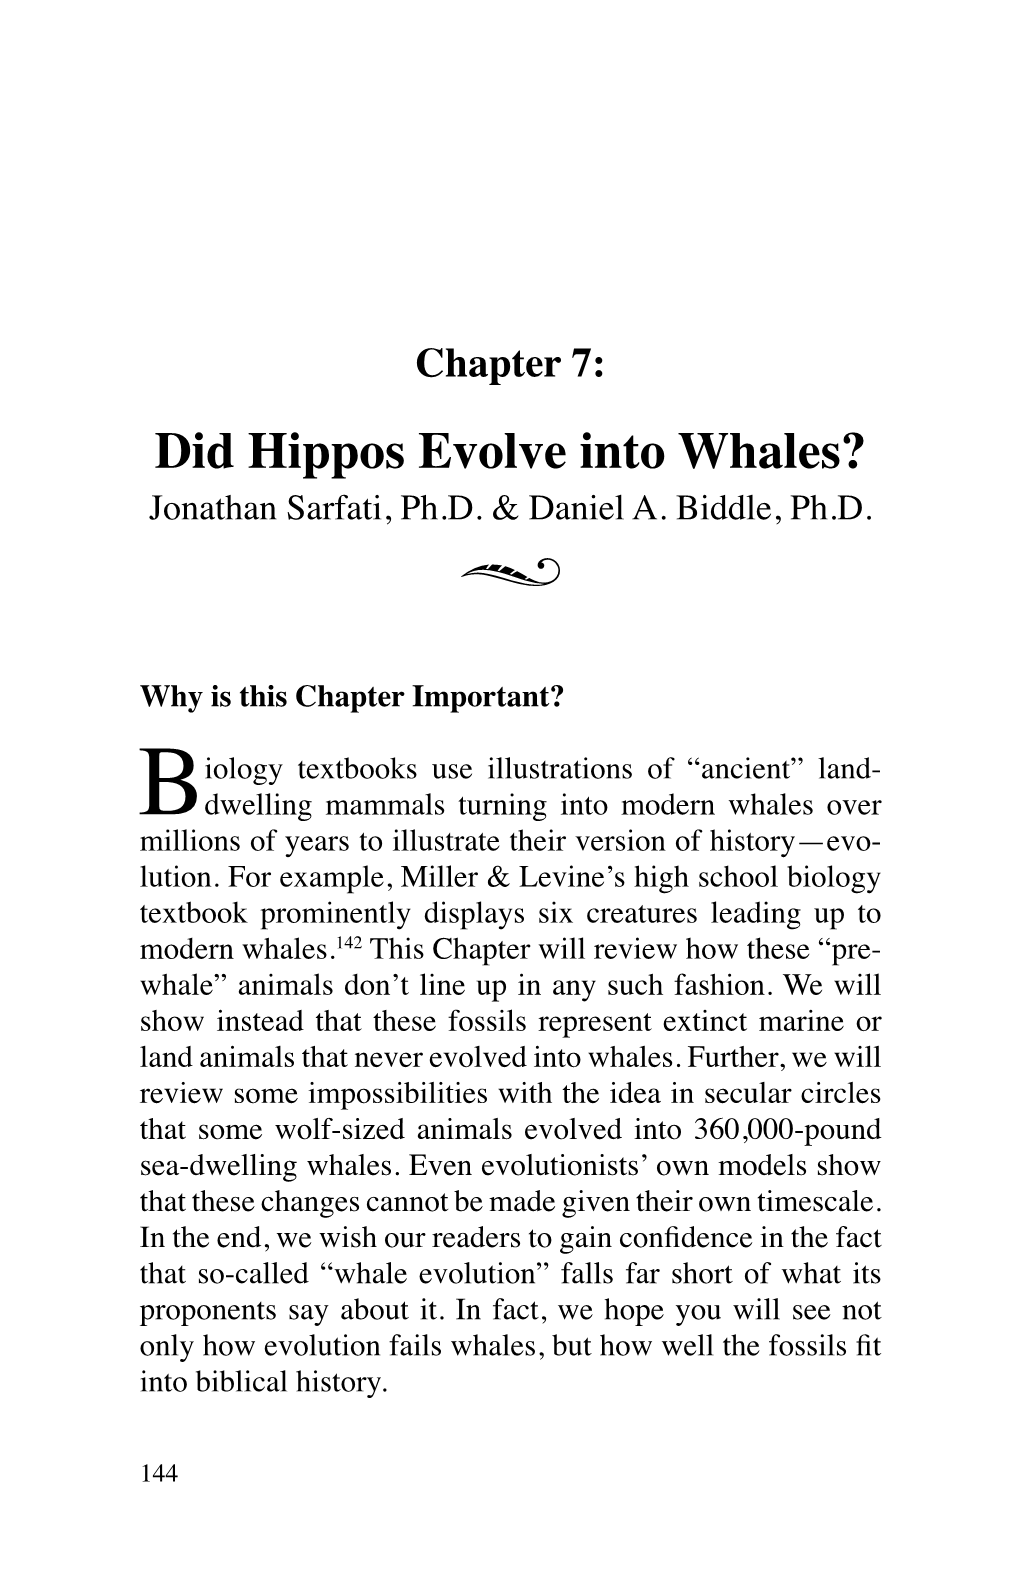 Whale Evolution” Falls Far Short of What Its Proponents Say About It